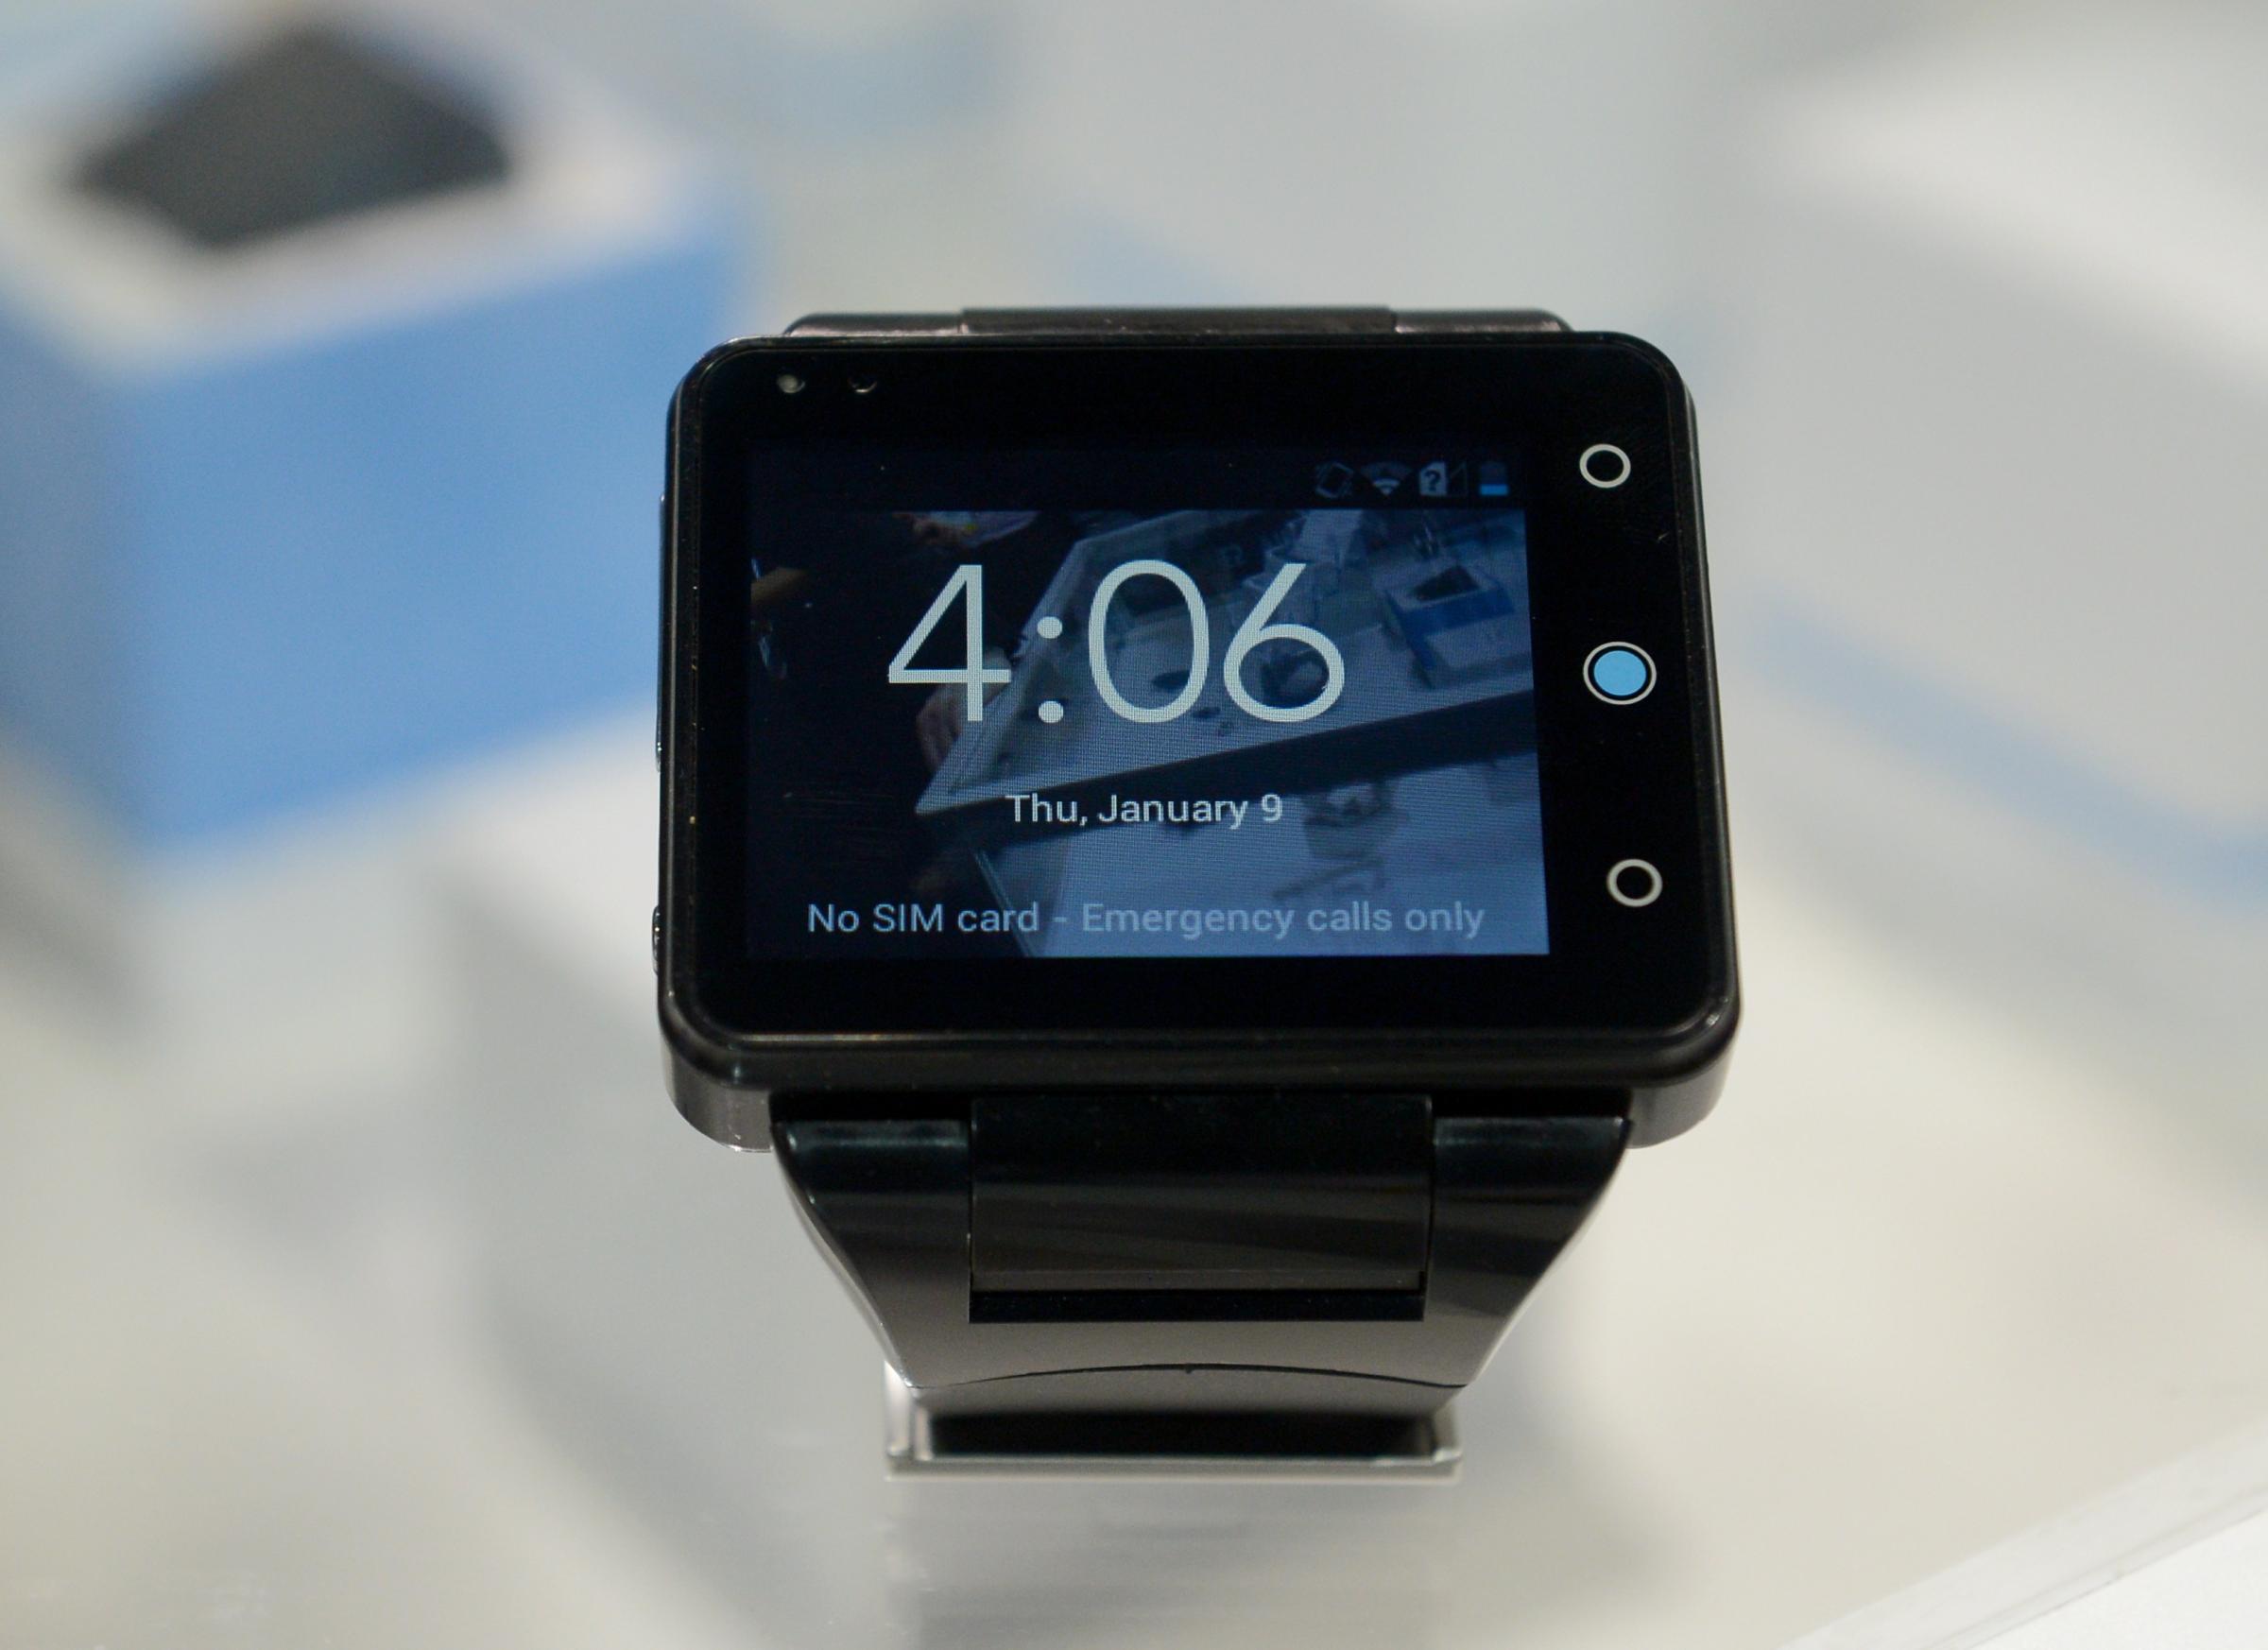 A Neptune Pine smartwatch at the Consumer Electronics Show (CES) in Las Vegas on Jan 9, 2014.